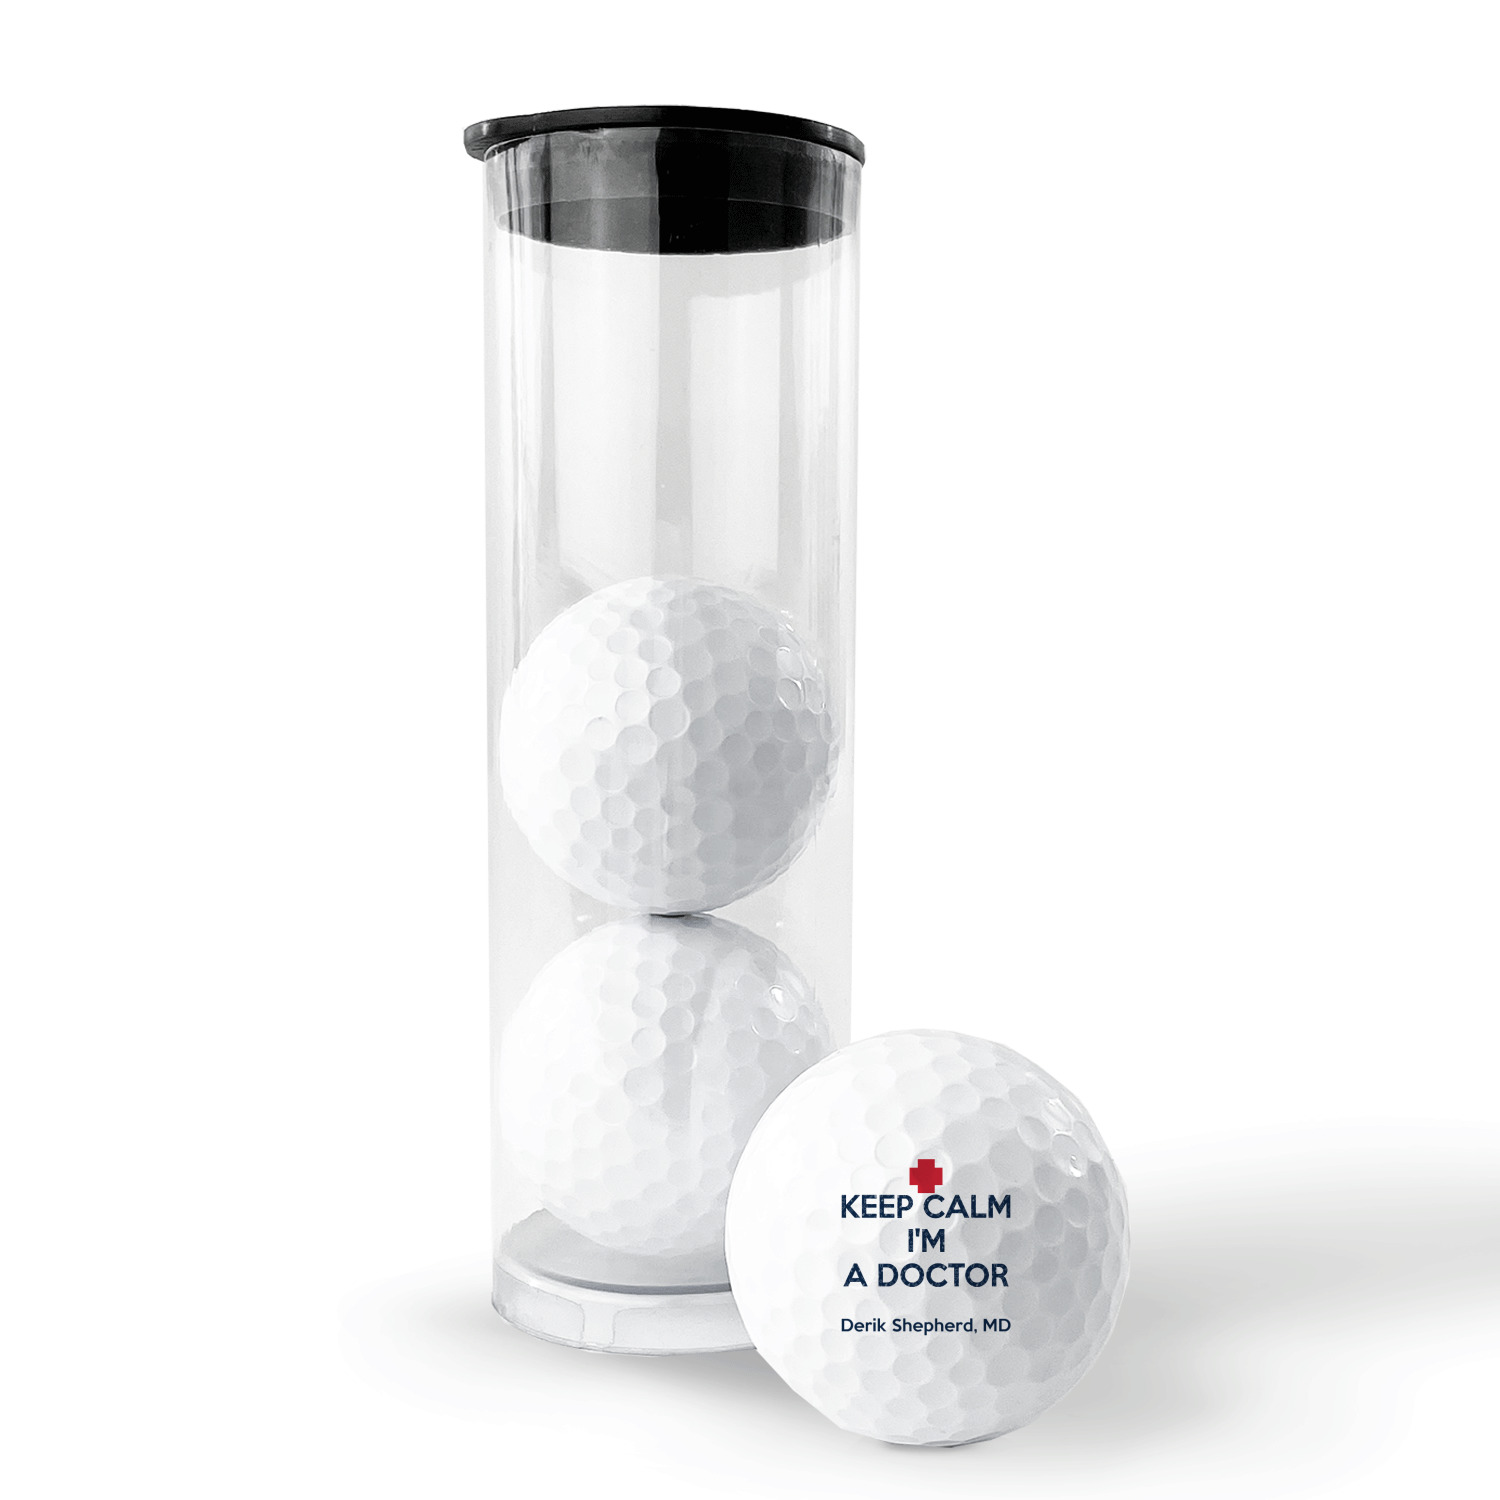 https://www.youcustomizeit.com/common/MAKE/1932582/Medical-Doctor-Golf-Balls-Generic-Set-of-3-PACKAGING.jpg?lm=1697662701